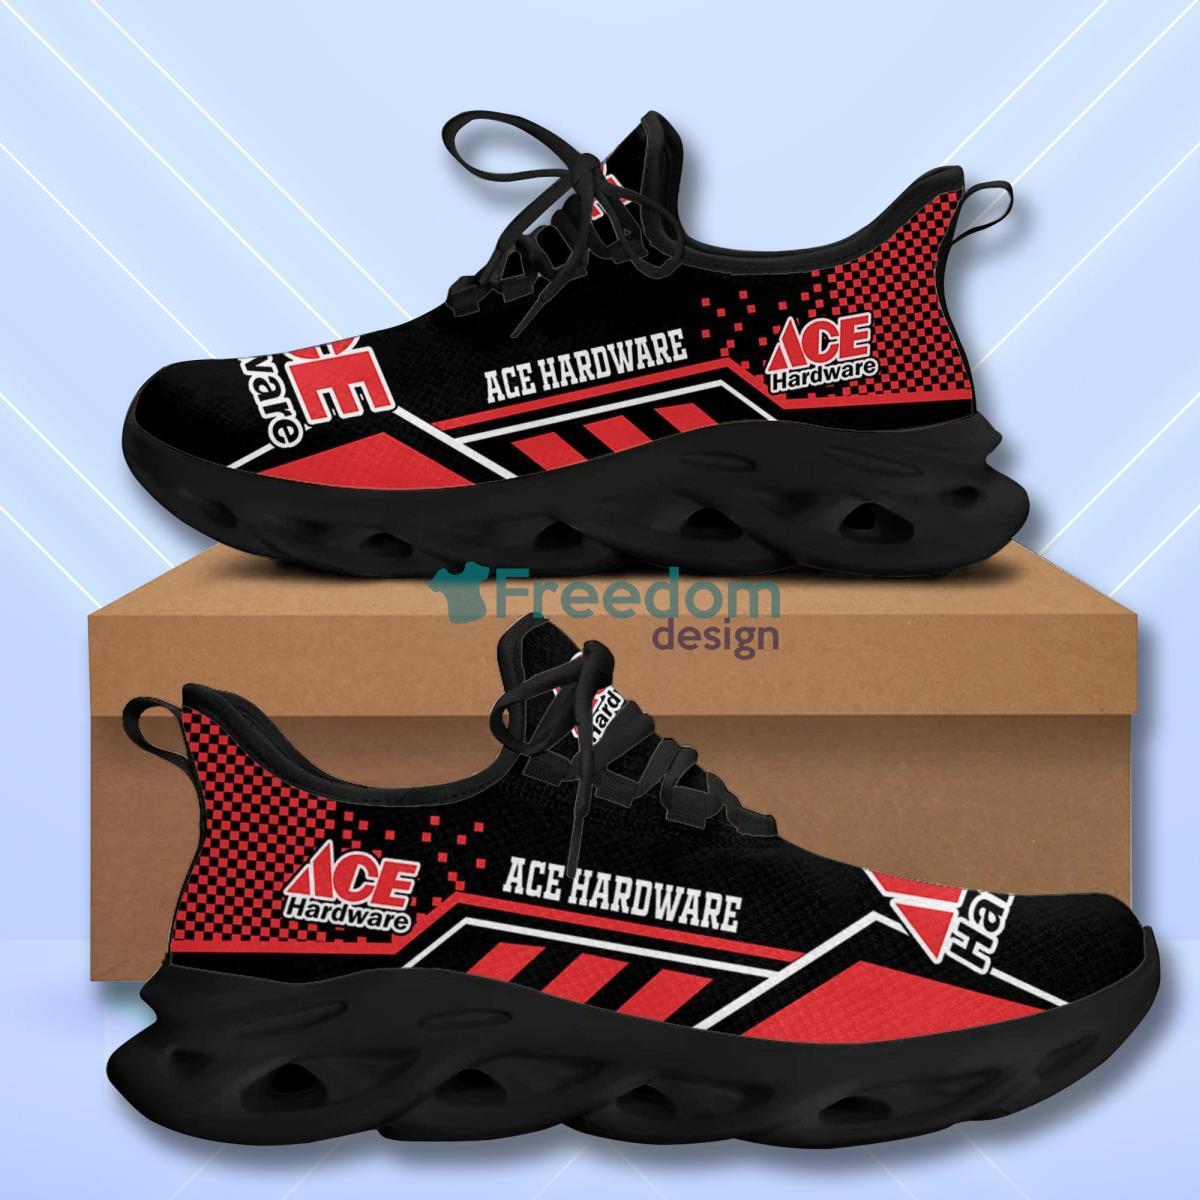 ACE Hardware Max Soul Shoes Hot Trending Impressive Gift For Men Women Product Photo 1